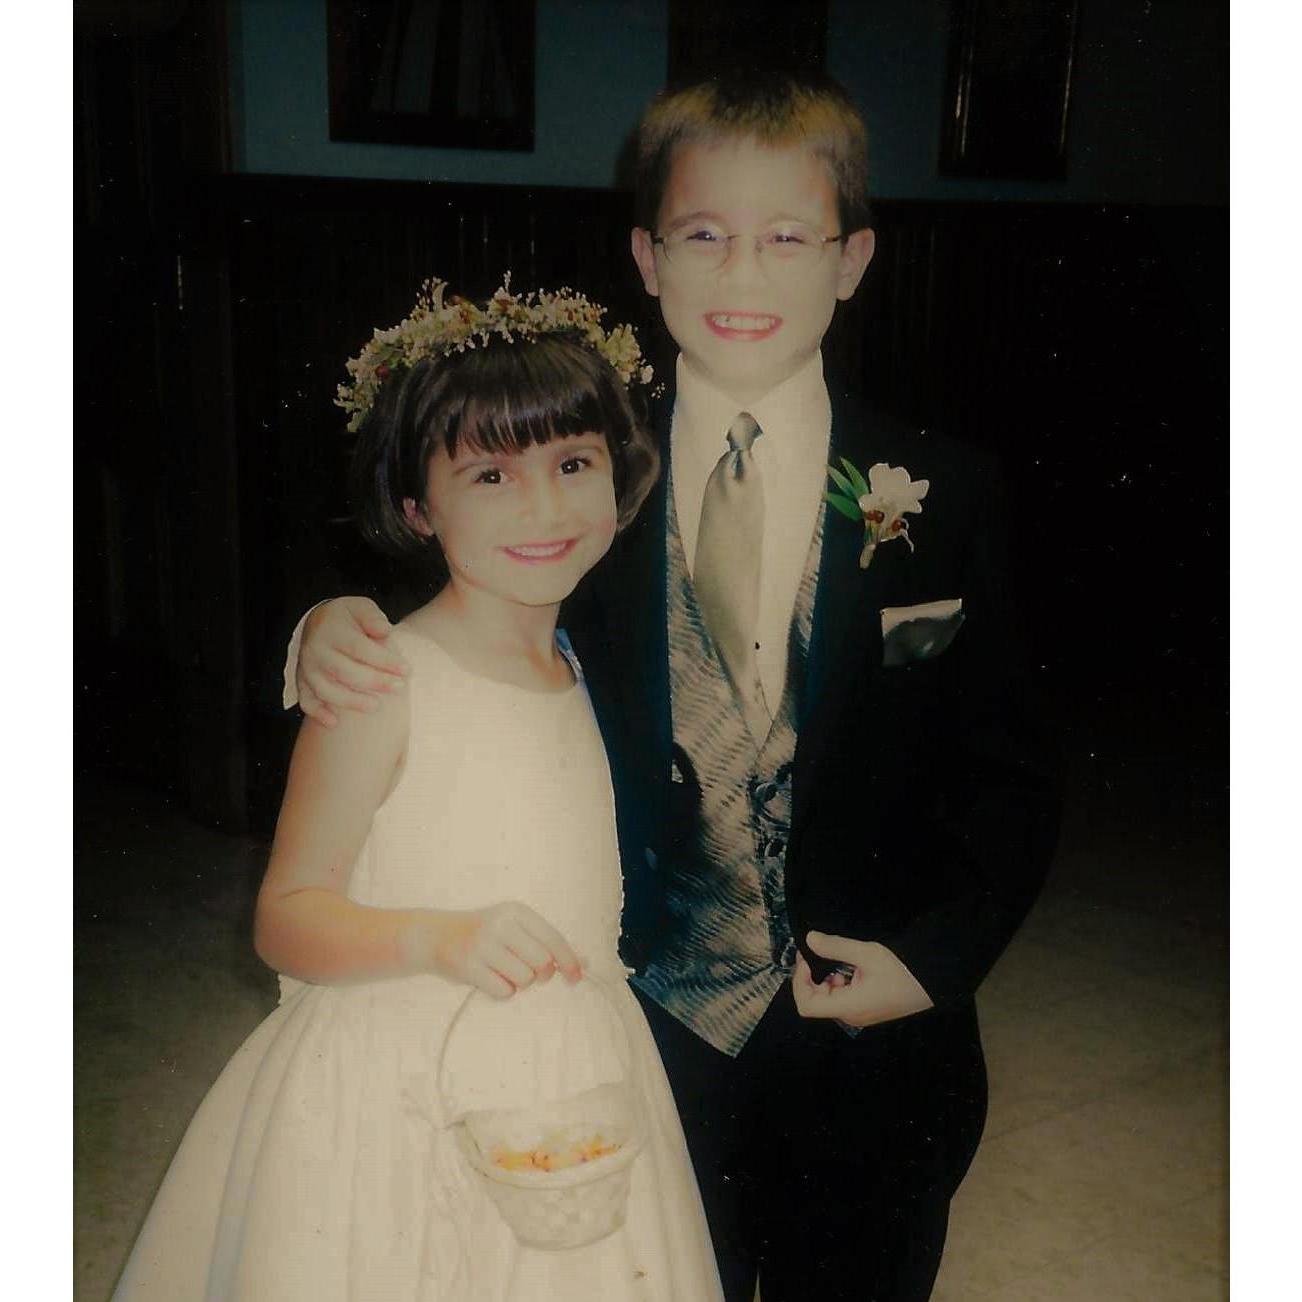 Maddie and Nick - flower girl and ring bearer (2001)